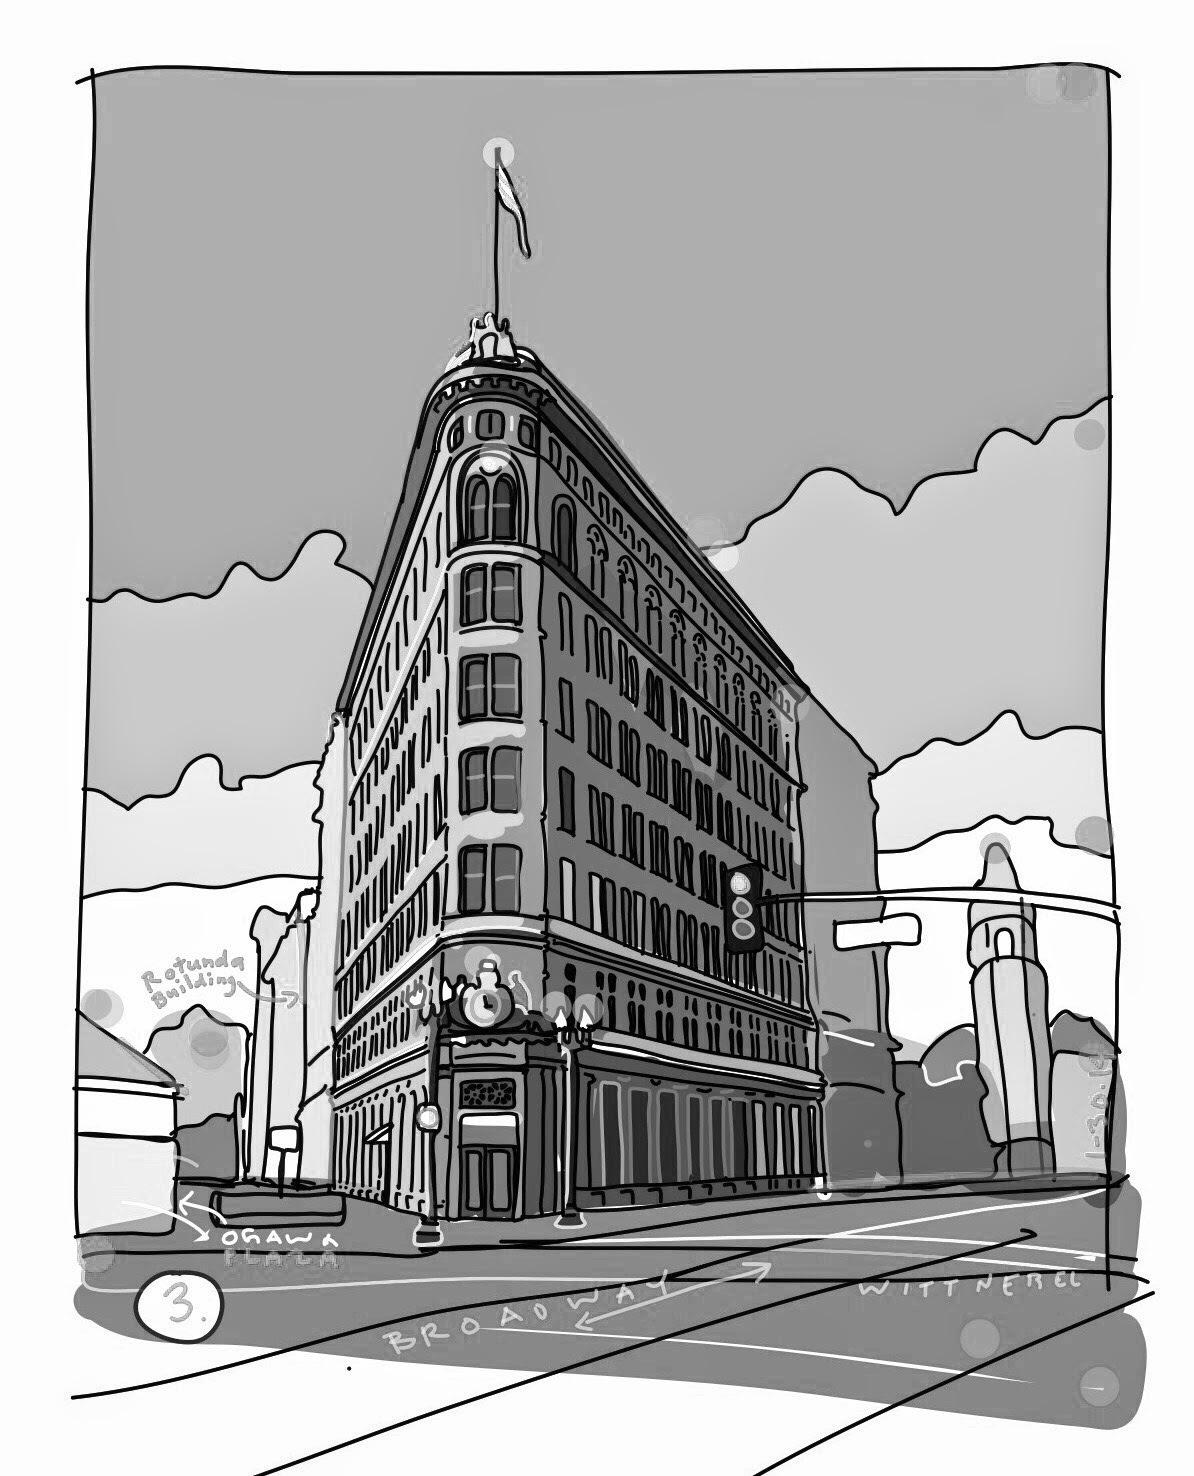 Drawing On The World For The Love Of A Flatiron Building In Oakland A Greytone Version First National Bank Of Oakland 1907